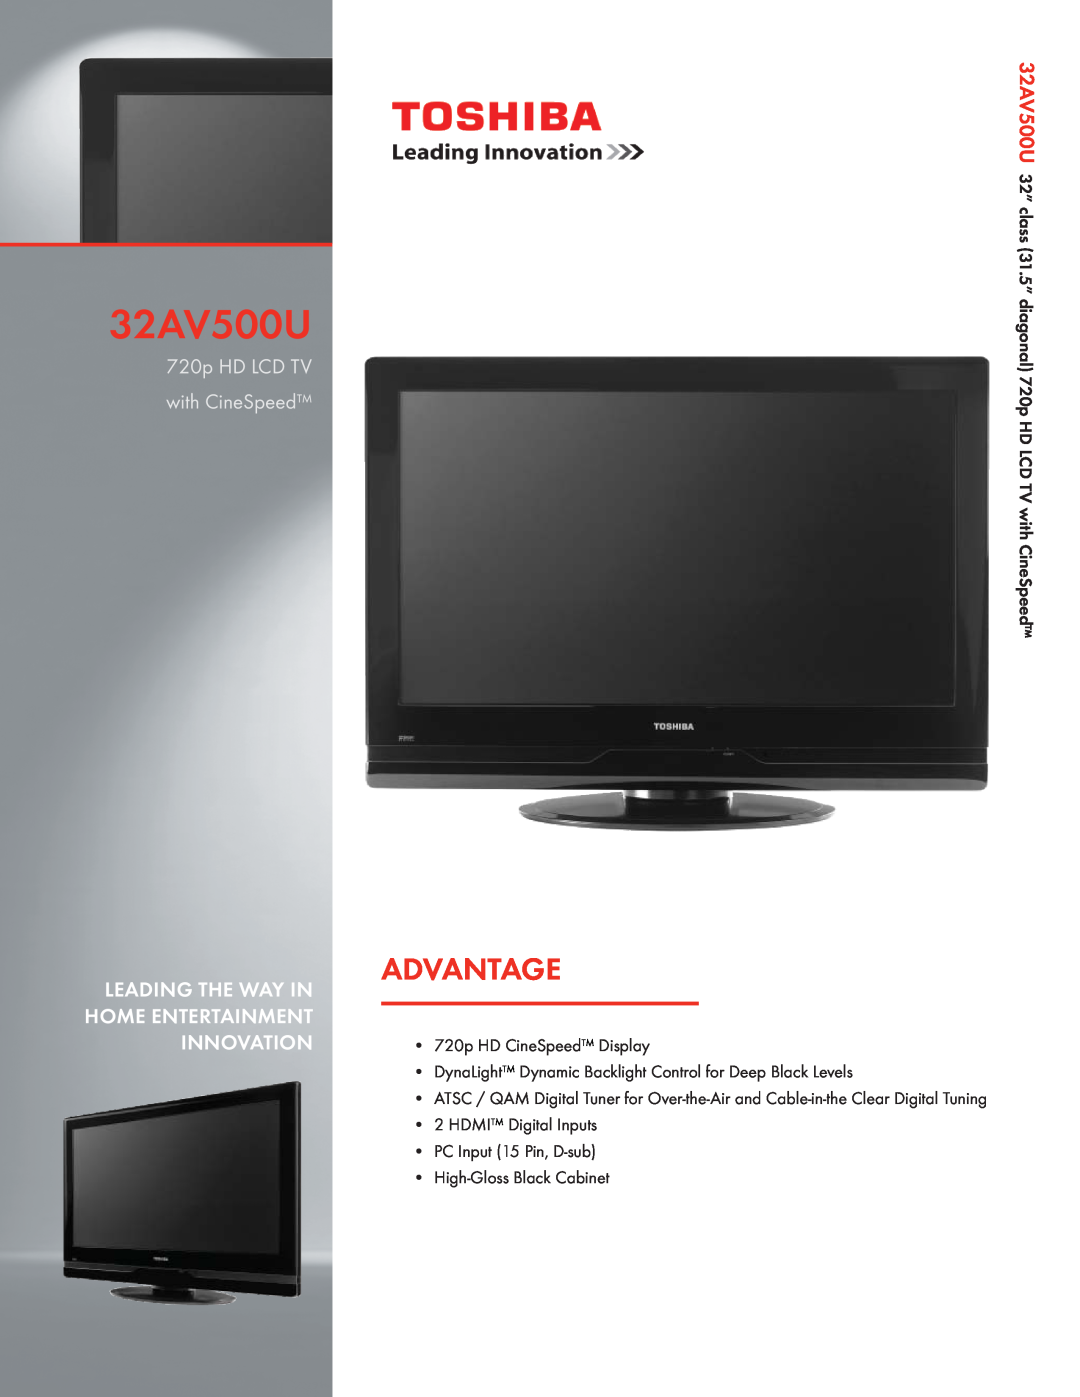 Toshiba 32AV500U manual Advantage, 720p HD LCD TV with CineSpeed, Leading The Way In Home Entertainment Innovation 